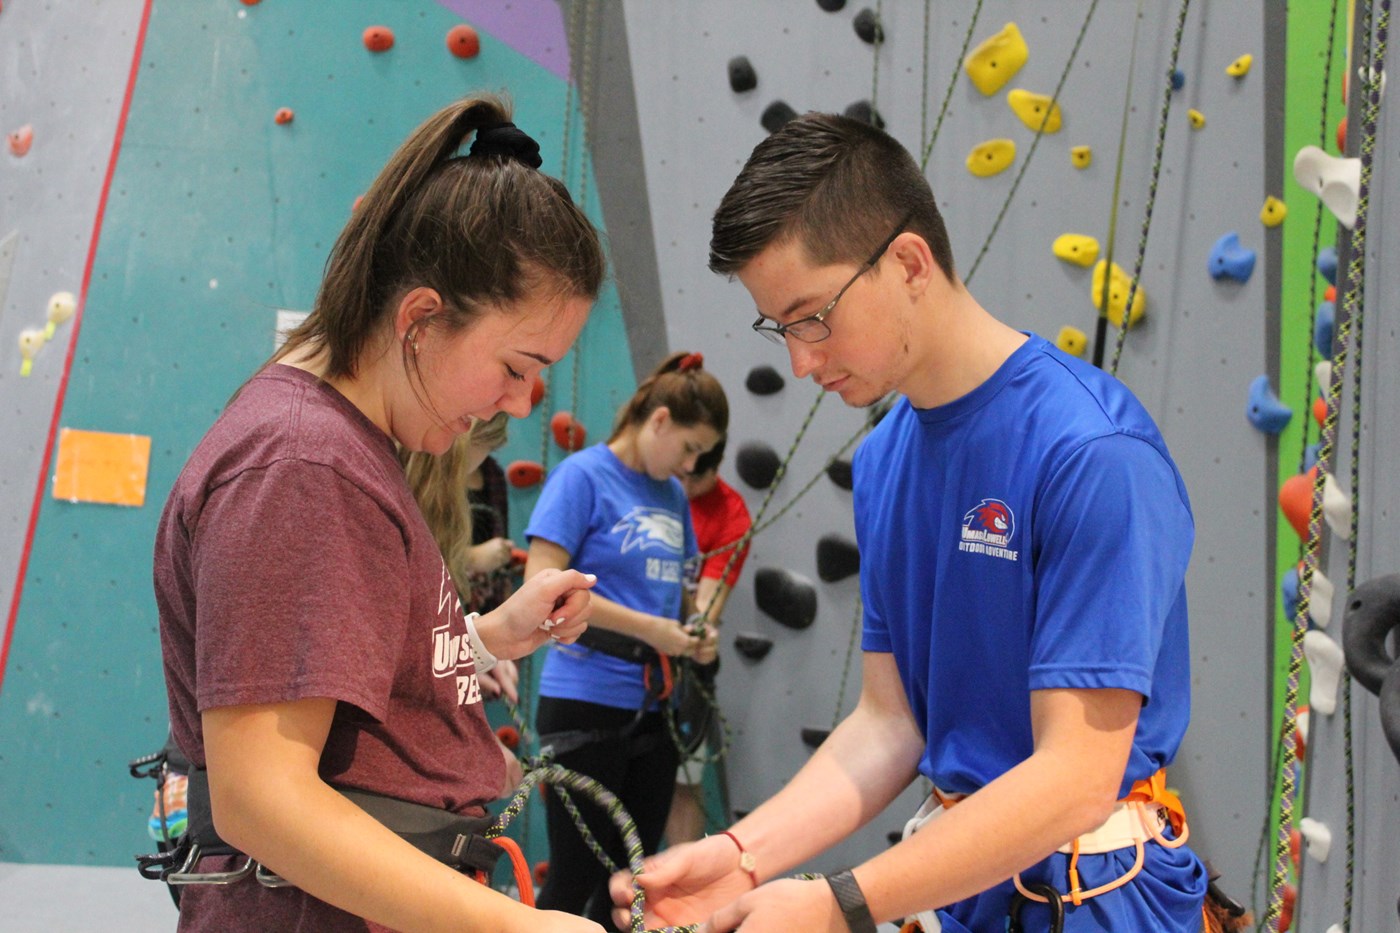 Two students climbing at Indoor Rock Climbing gym.